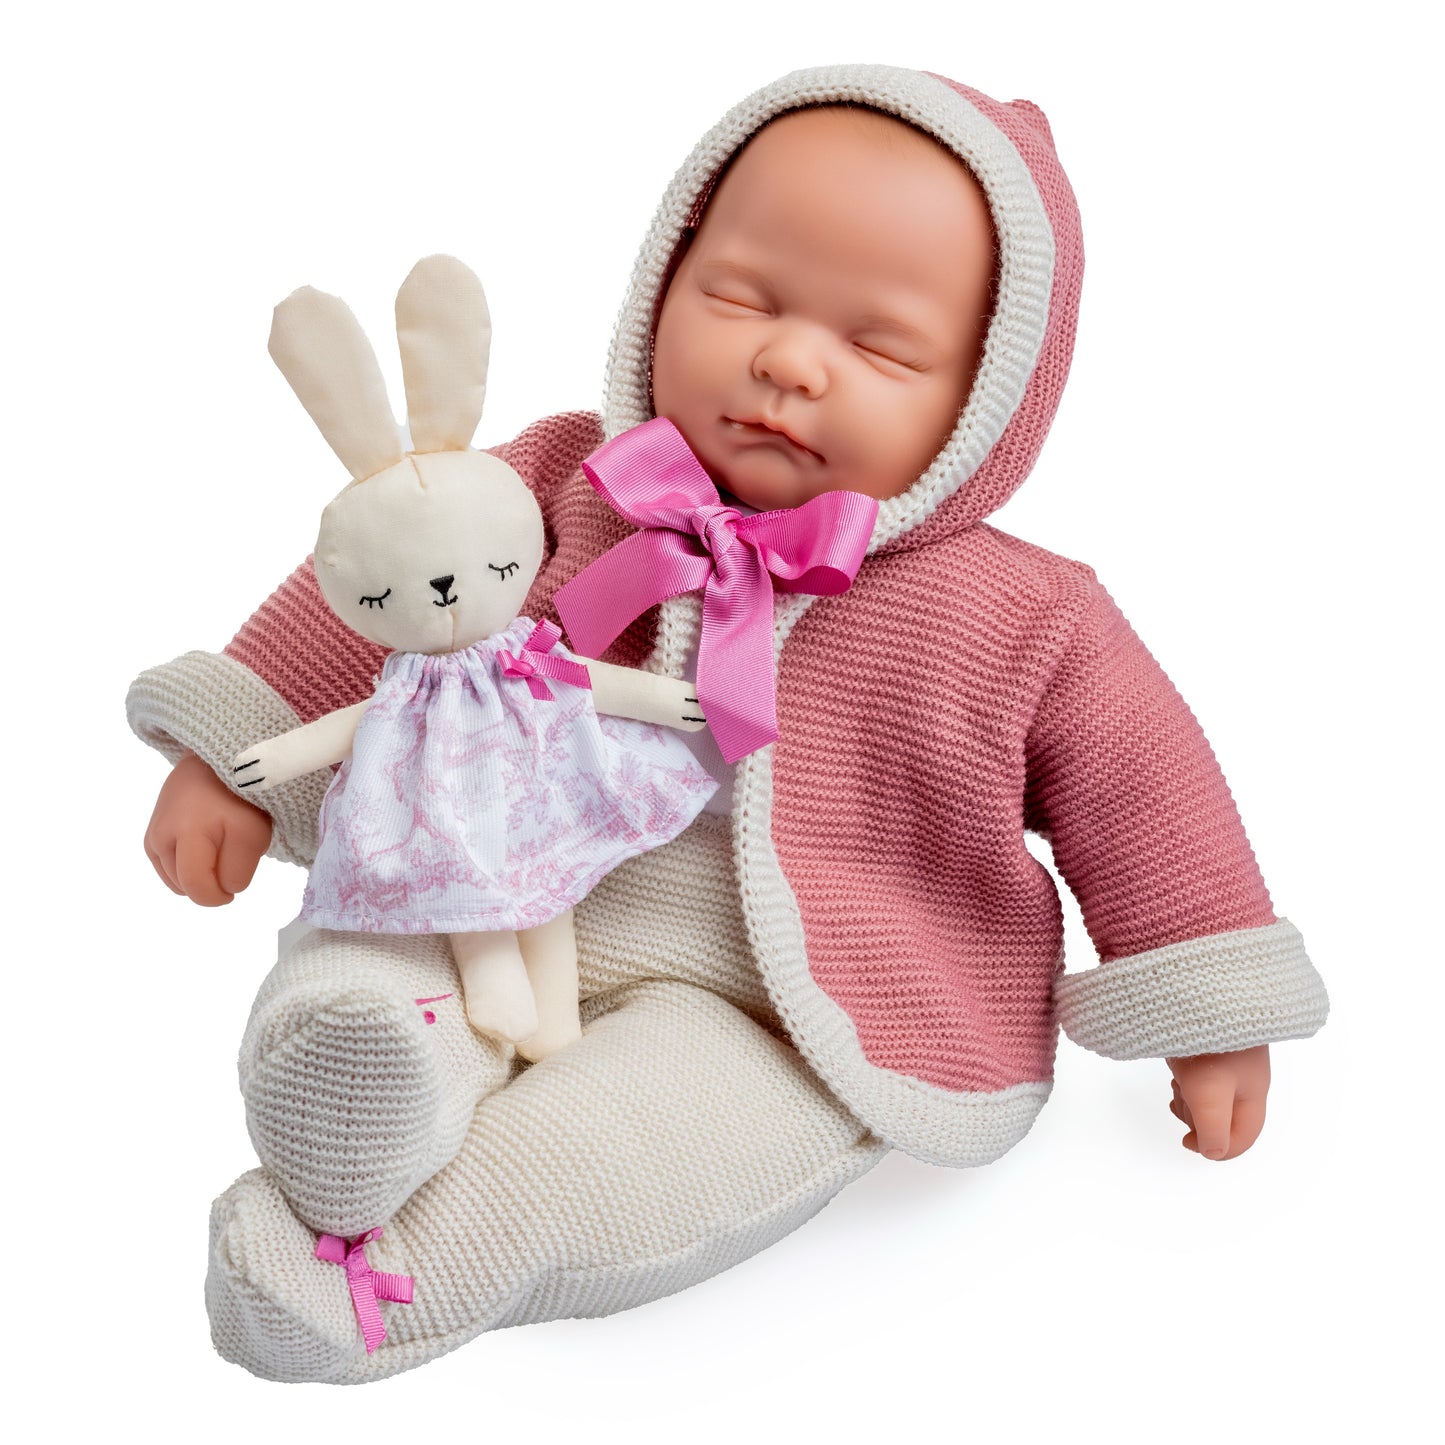 JC Toys La Baby Original Pink Collection Gift Set 17" Soft Body Closed Eyes